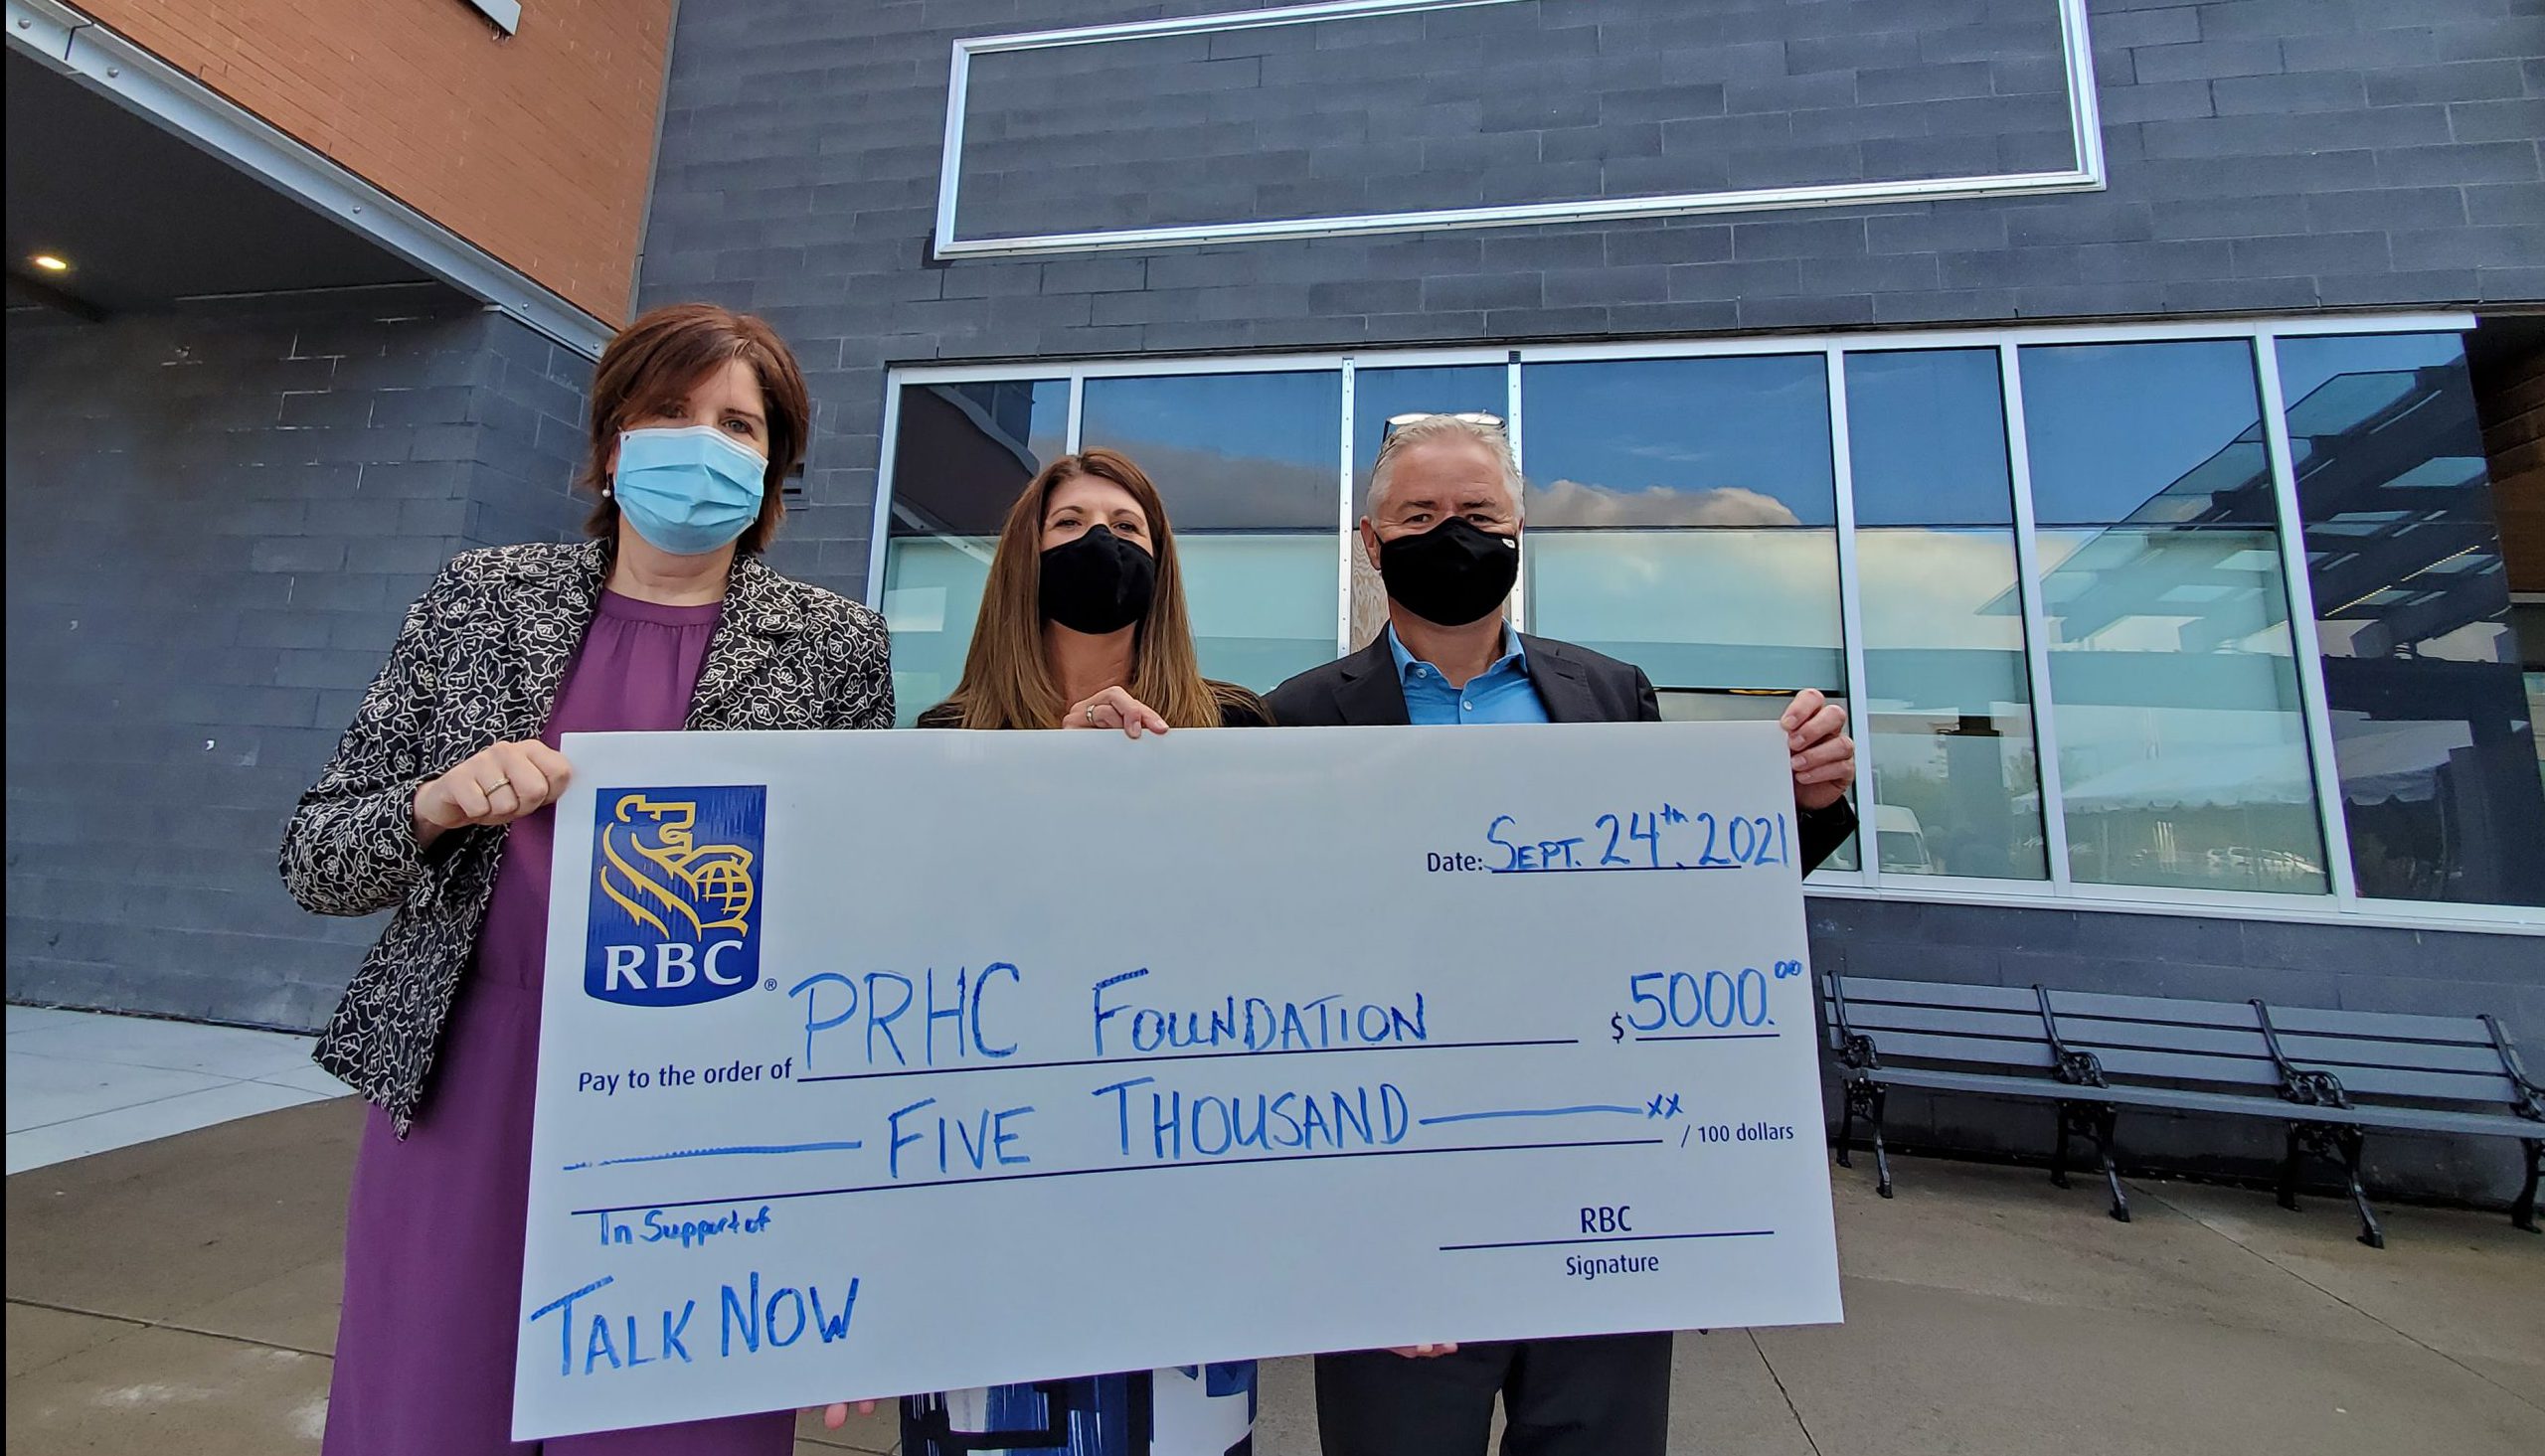 Representatives from PRHC Foundation and RBC pose with a big cheque